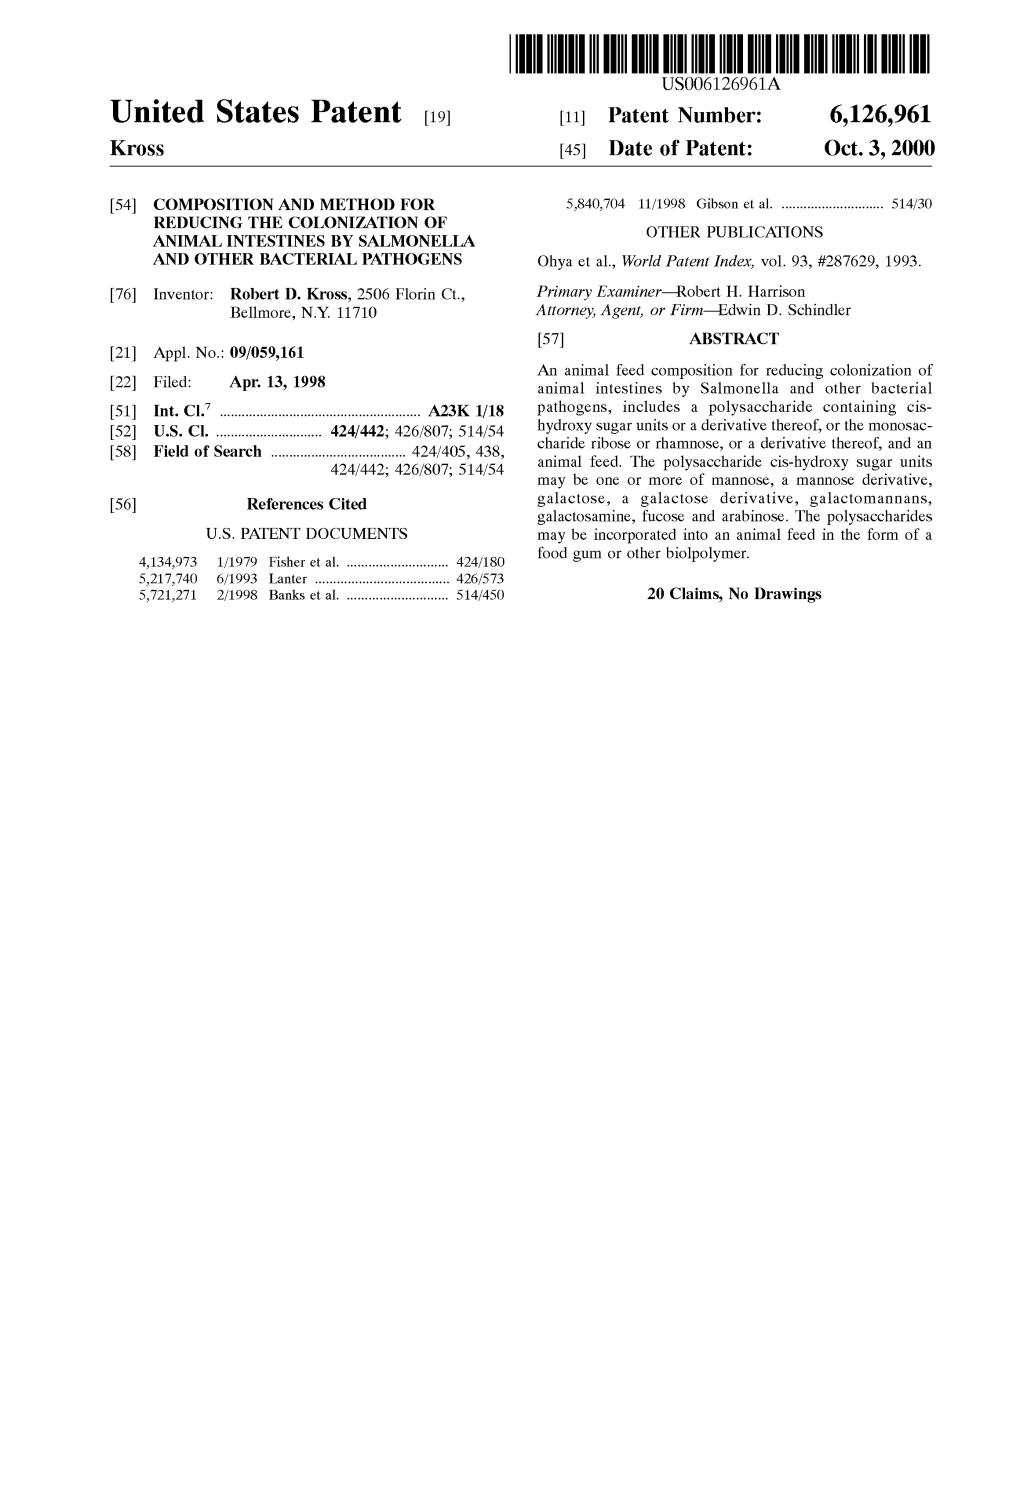 United States Patent (19) 11 Patent Number: 6,126,961 Kross (45) Date of Patent: Oct